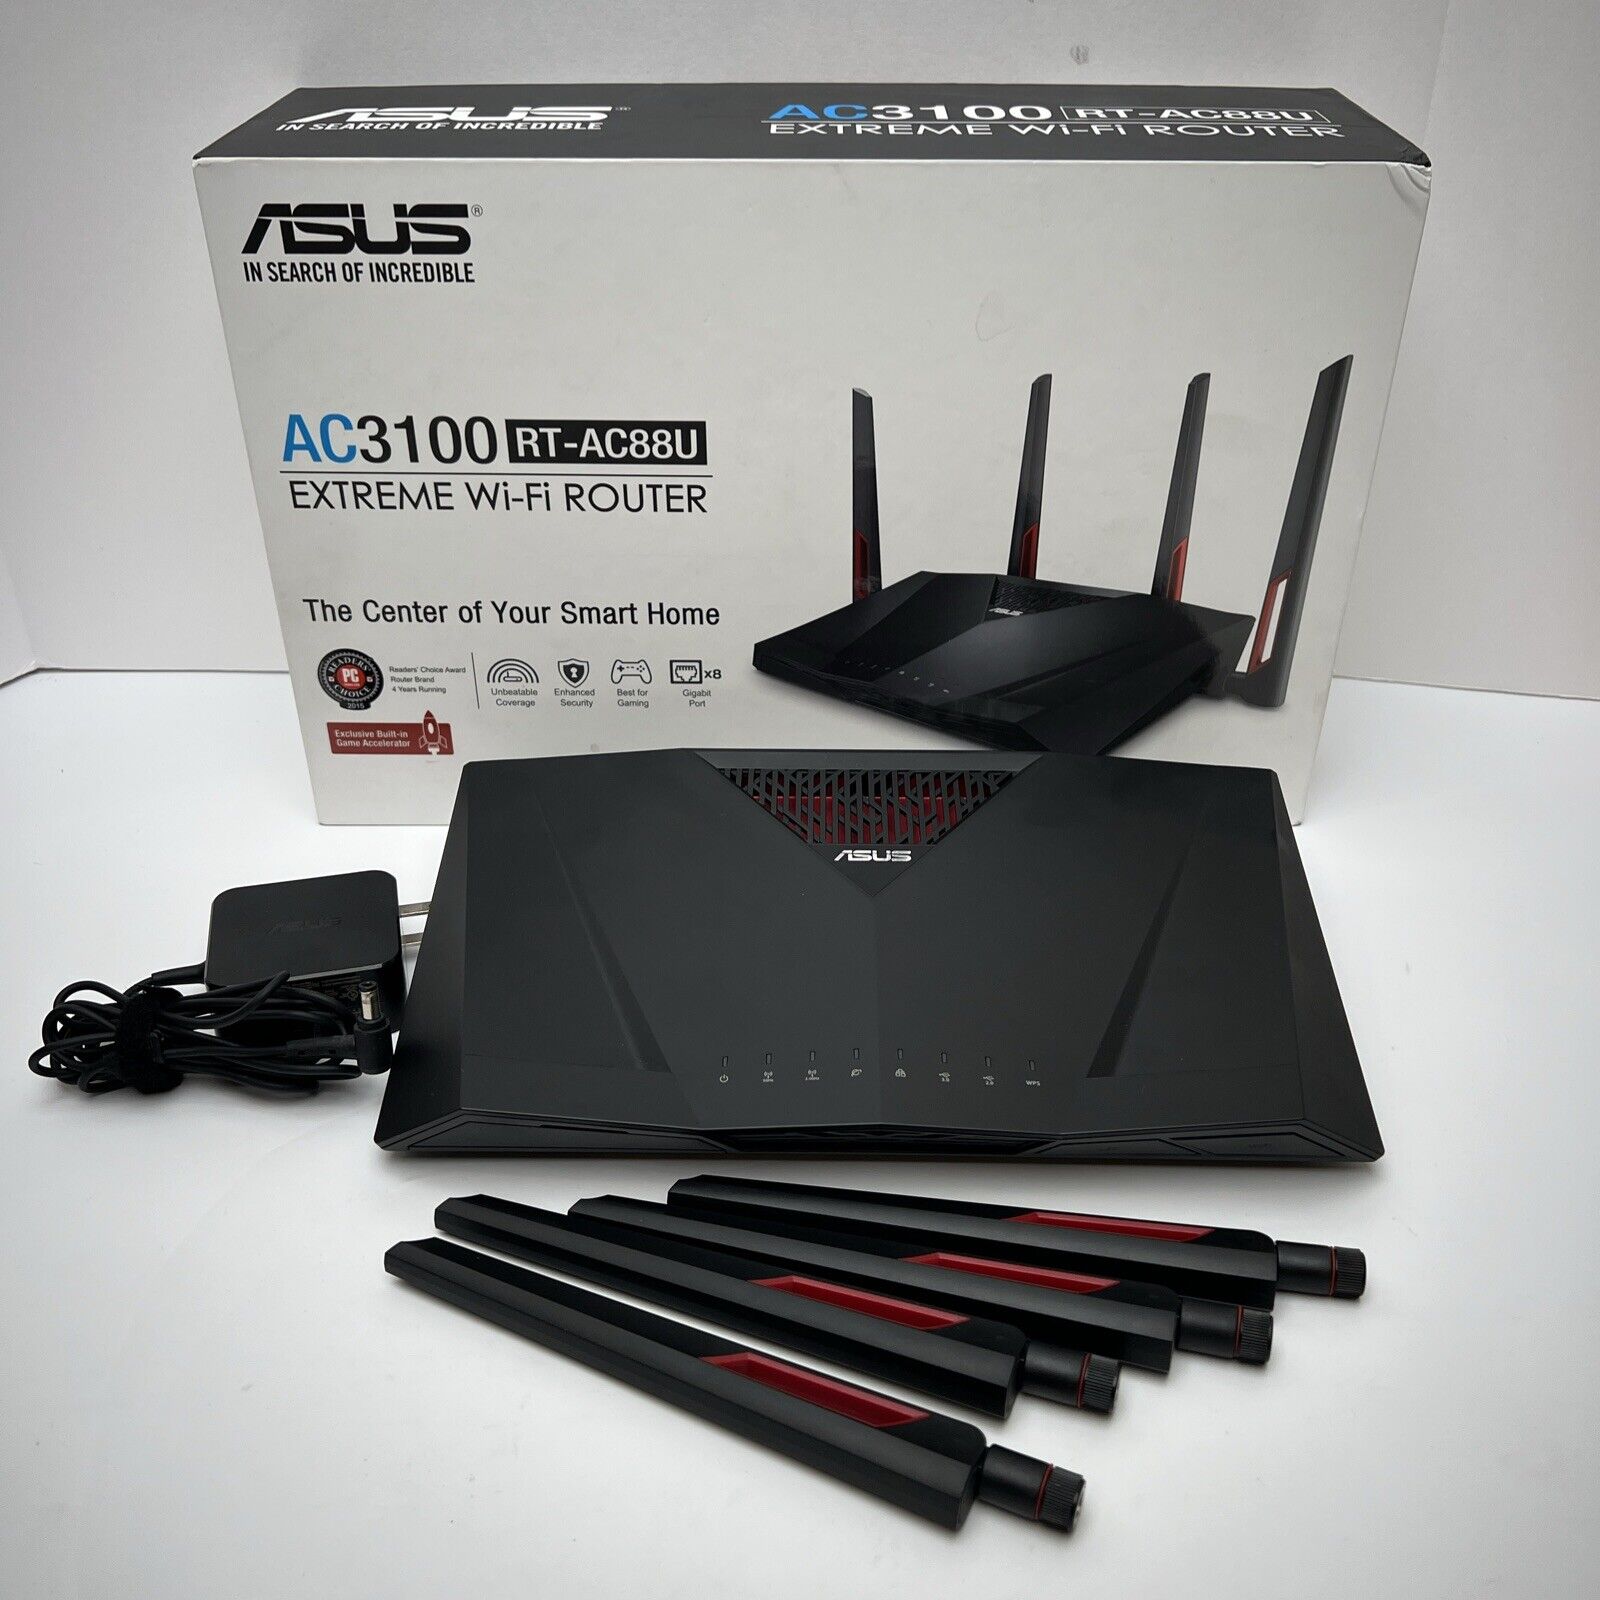 Asus AC3100 RT-AC88U Dual-Band Extreme Wi-Fi Gaming Gigabit Router Tested Works